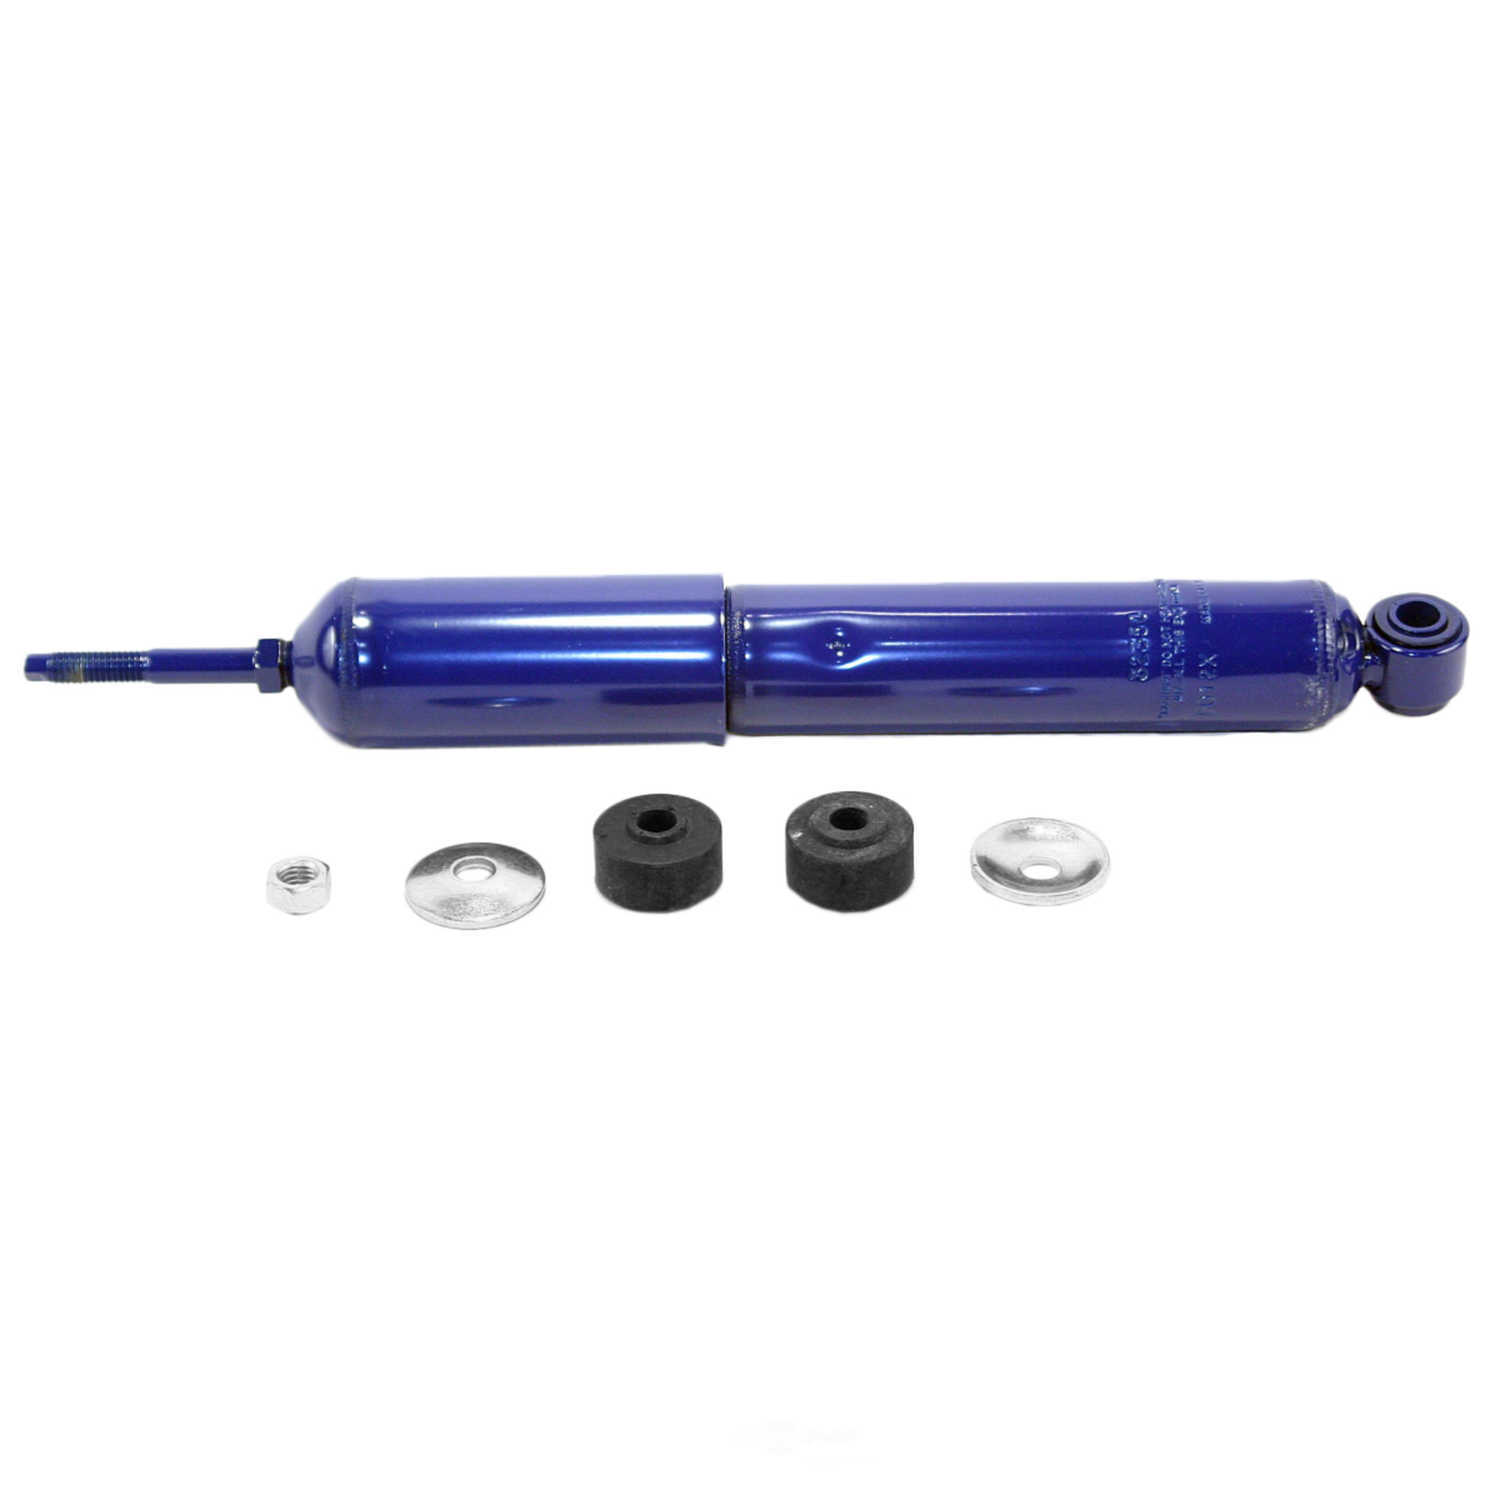 MONROE SHOCKS/STRUTS - Monro-Matic Plus Shock Absorber (With ABS Brakes, Front) - MOE 32350